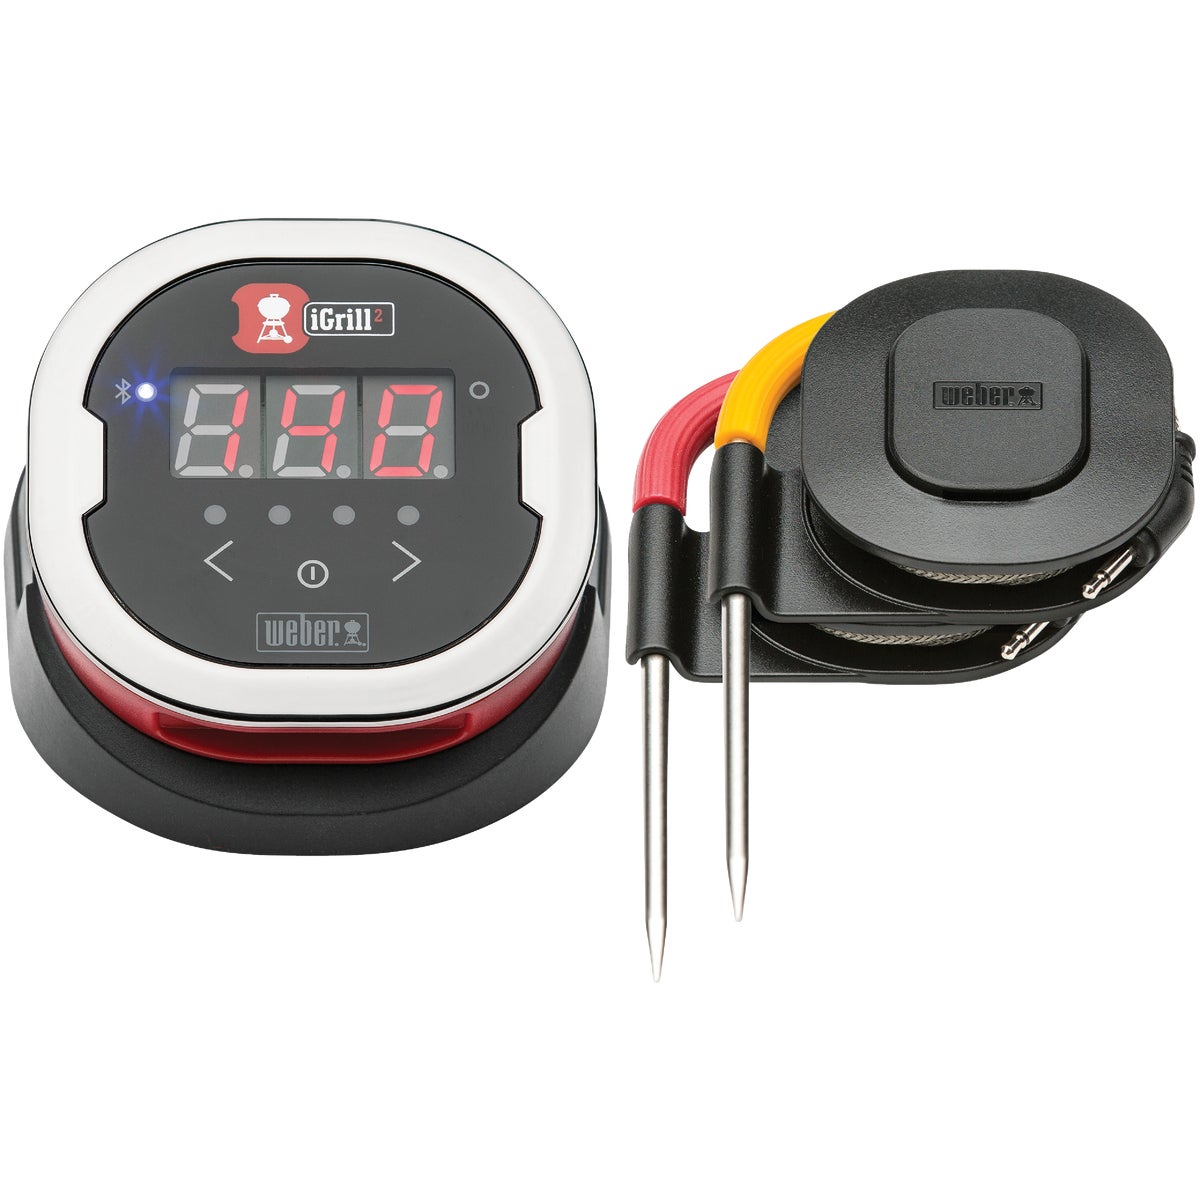 Item 601865, App-connected thermometer that monitors the progress of grilling from 